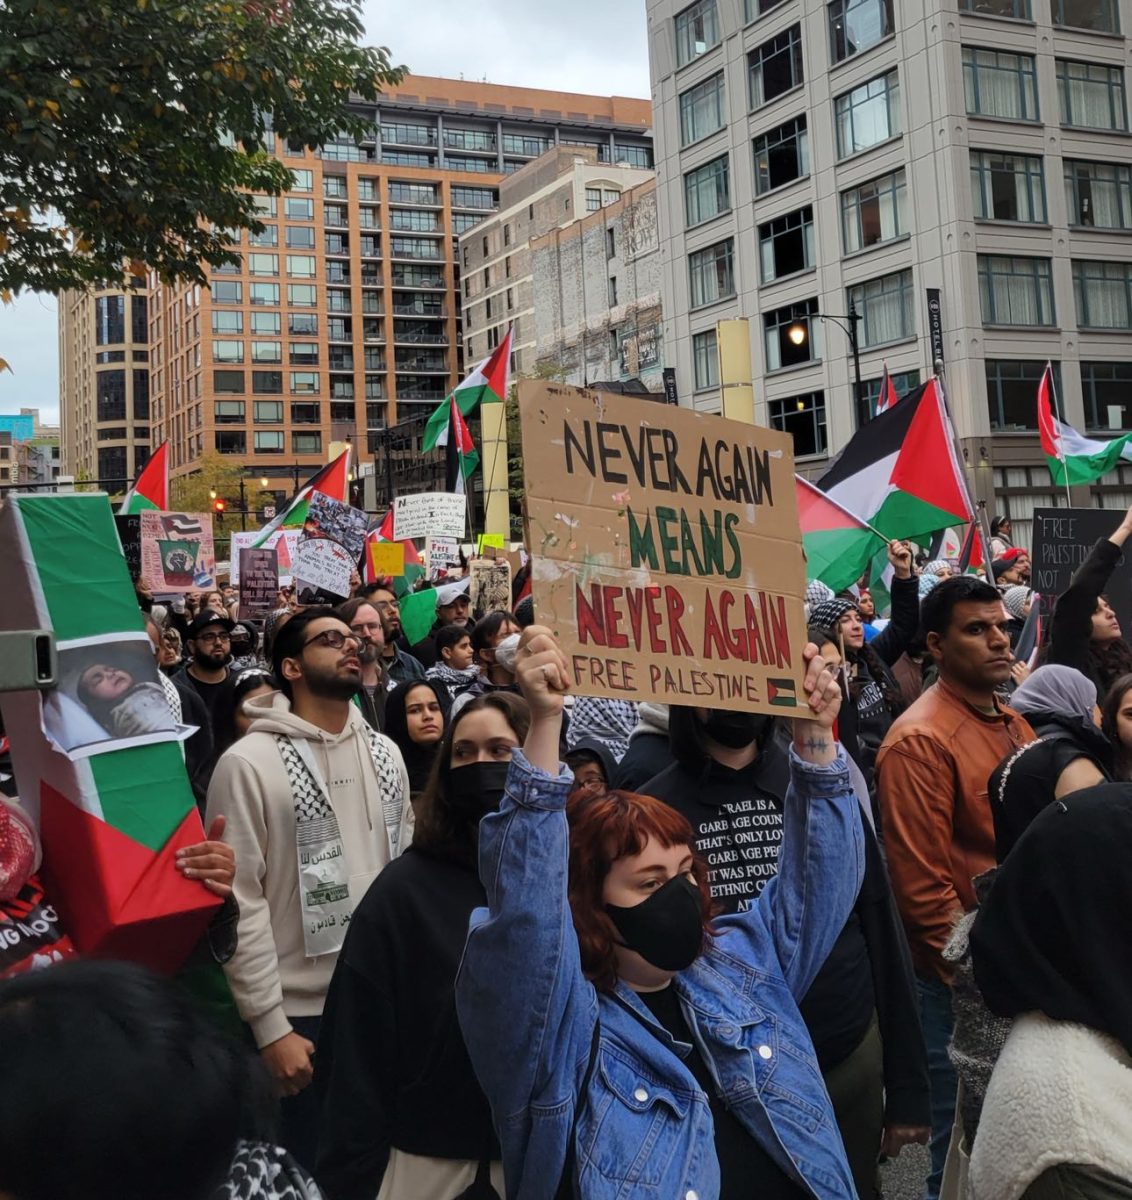 Protests+have+been+raging+on+in+Chicago+following+the+Israeli+invasion+into+Palestine.+%28Photo+courtesy+of+Aisha+Ali%29.